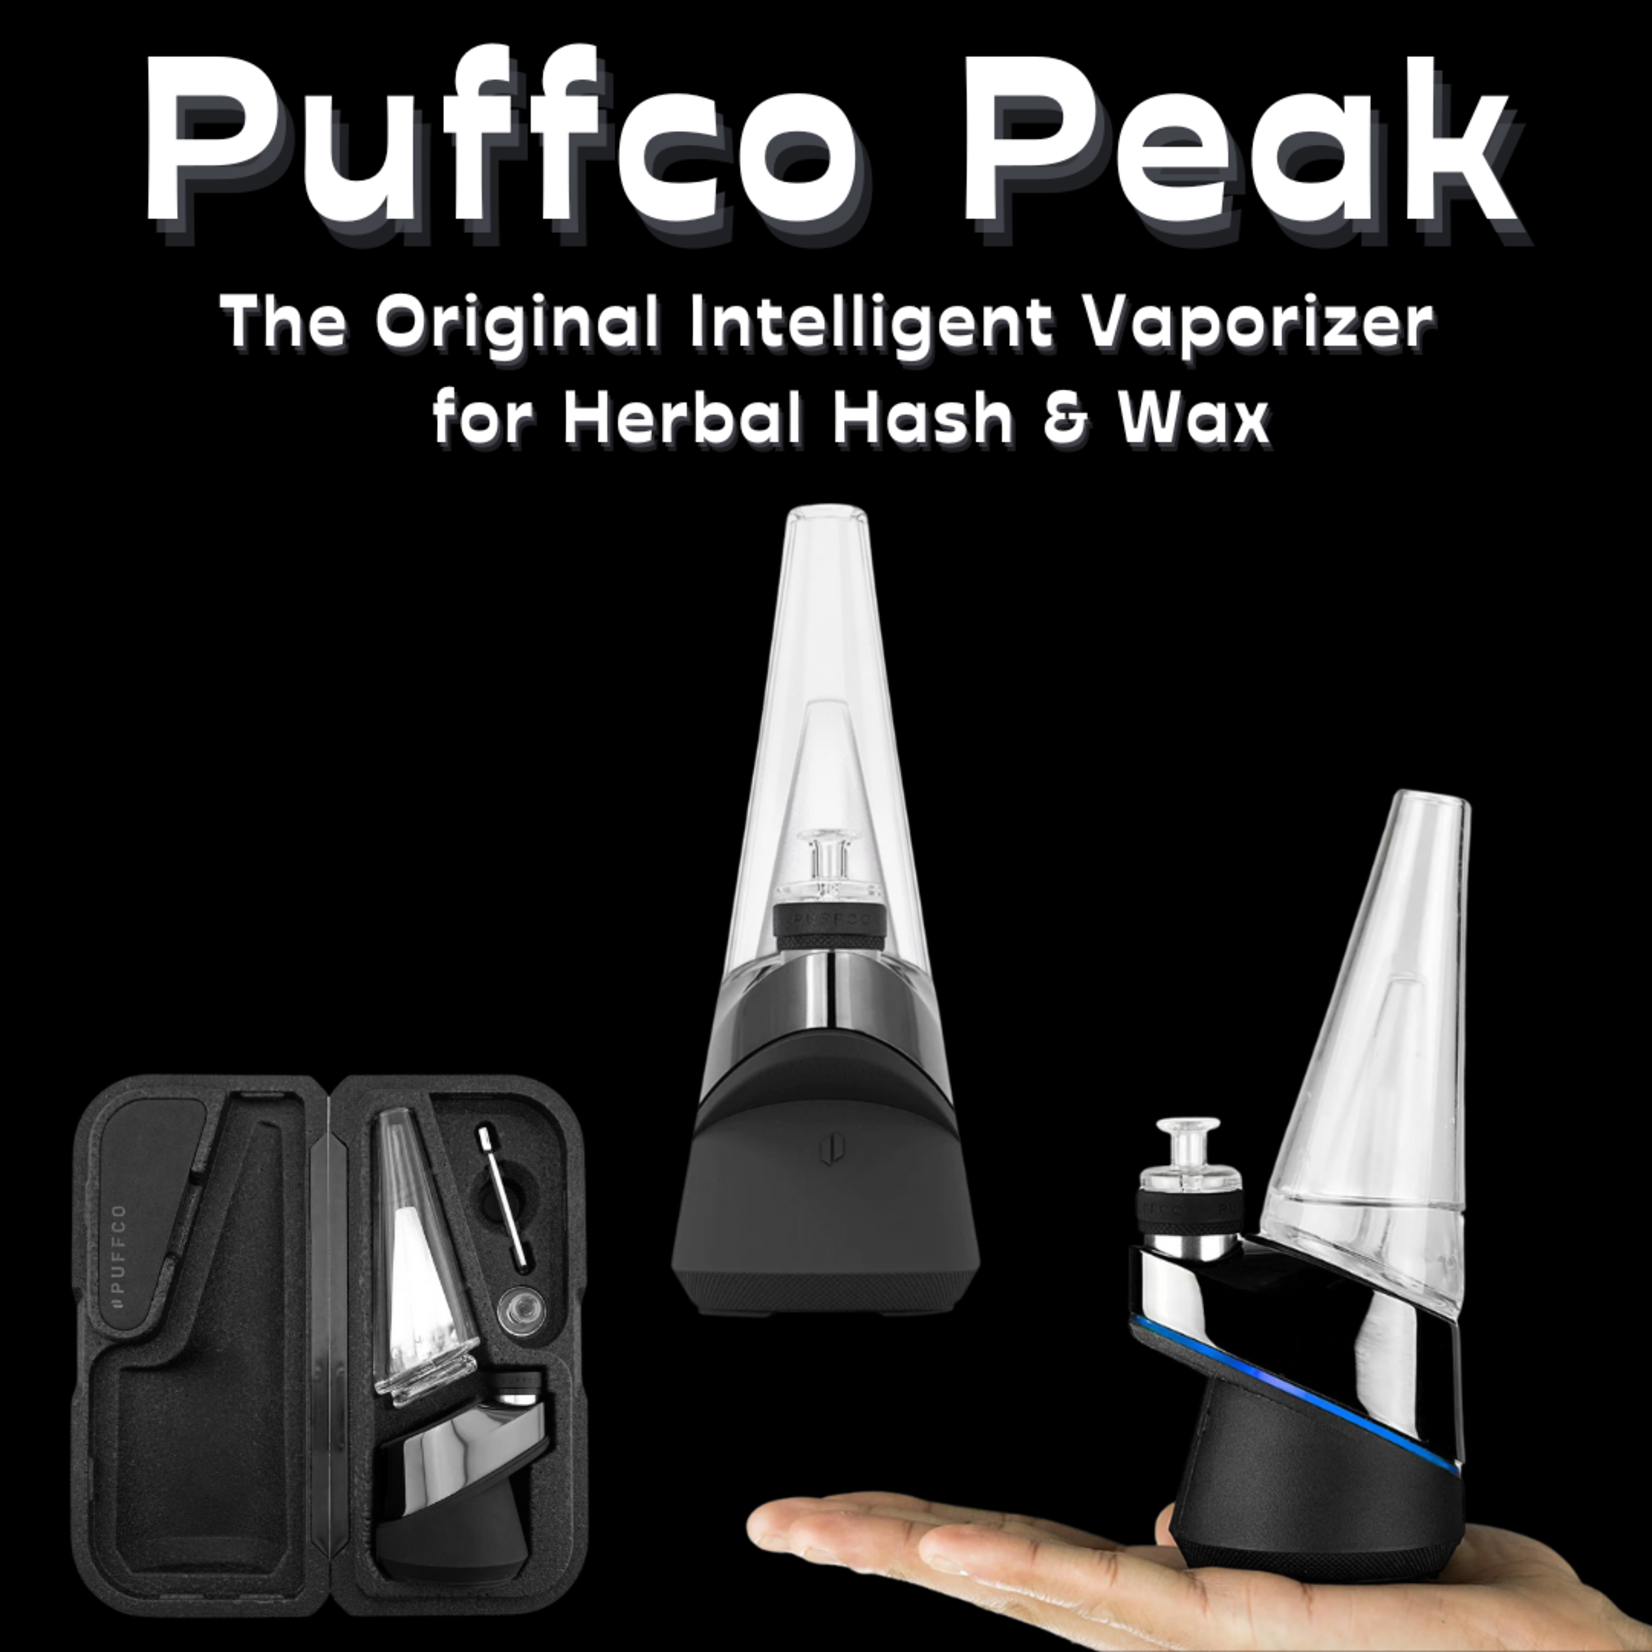 The Peak Smart Rig by Puffco